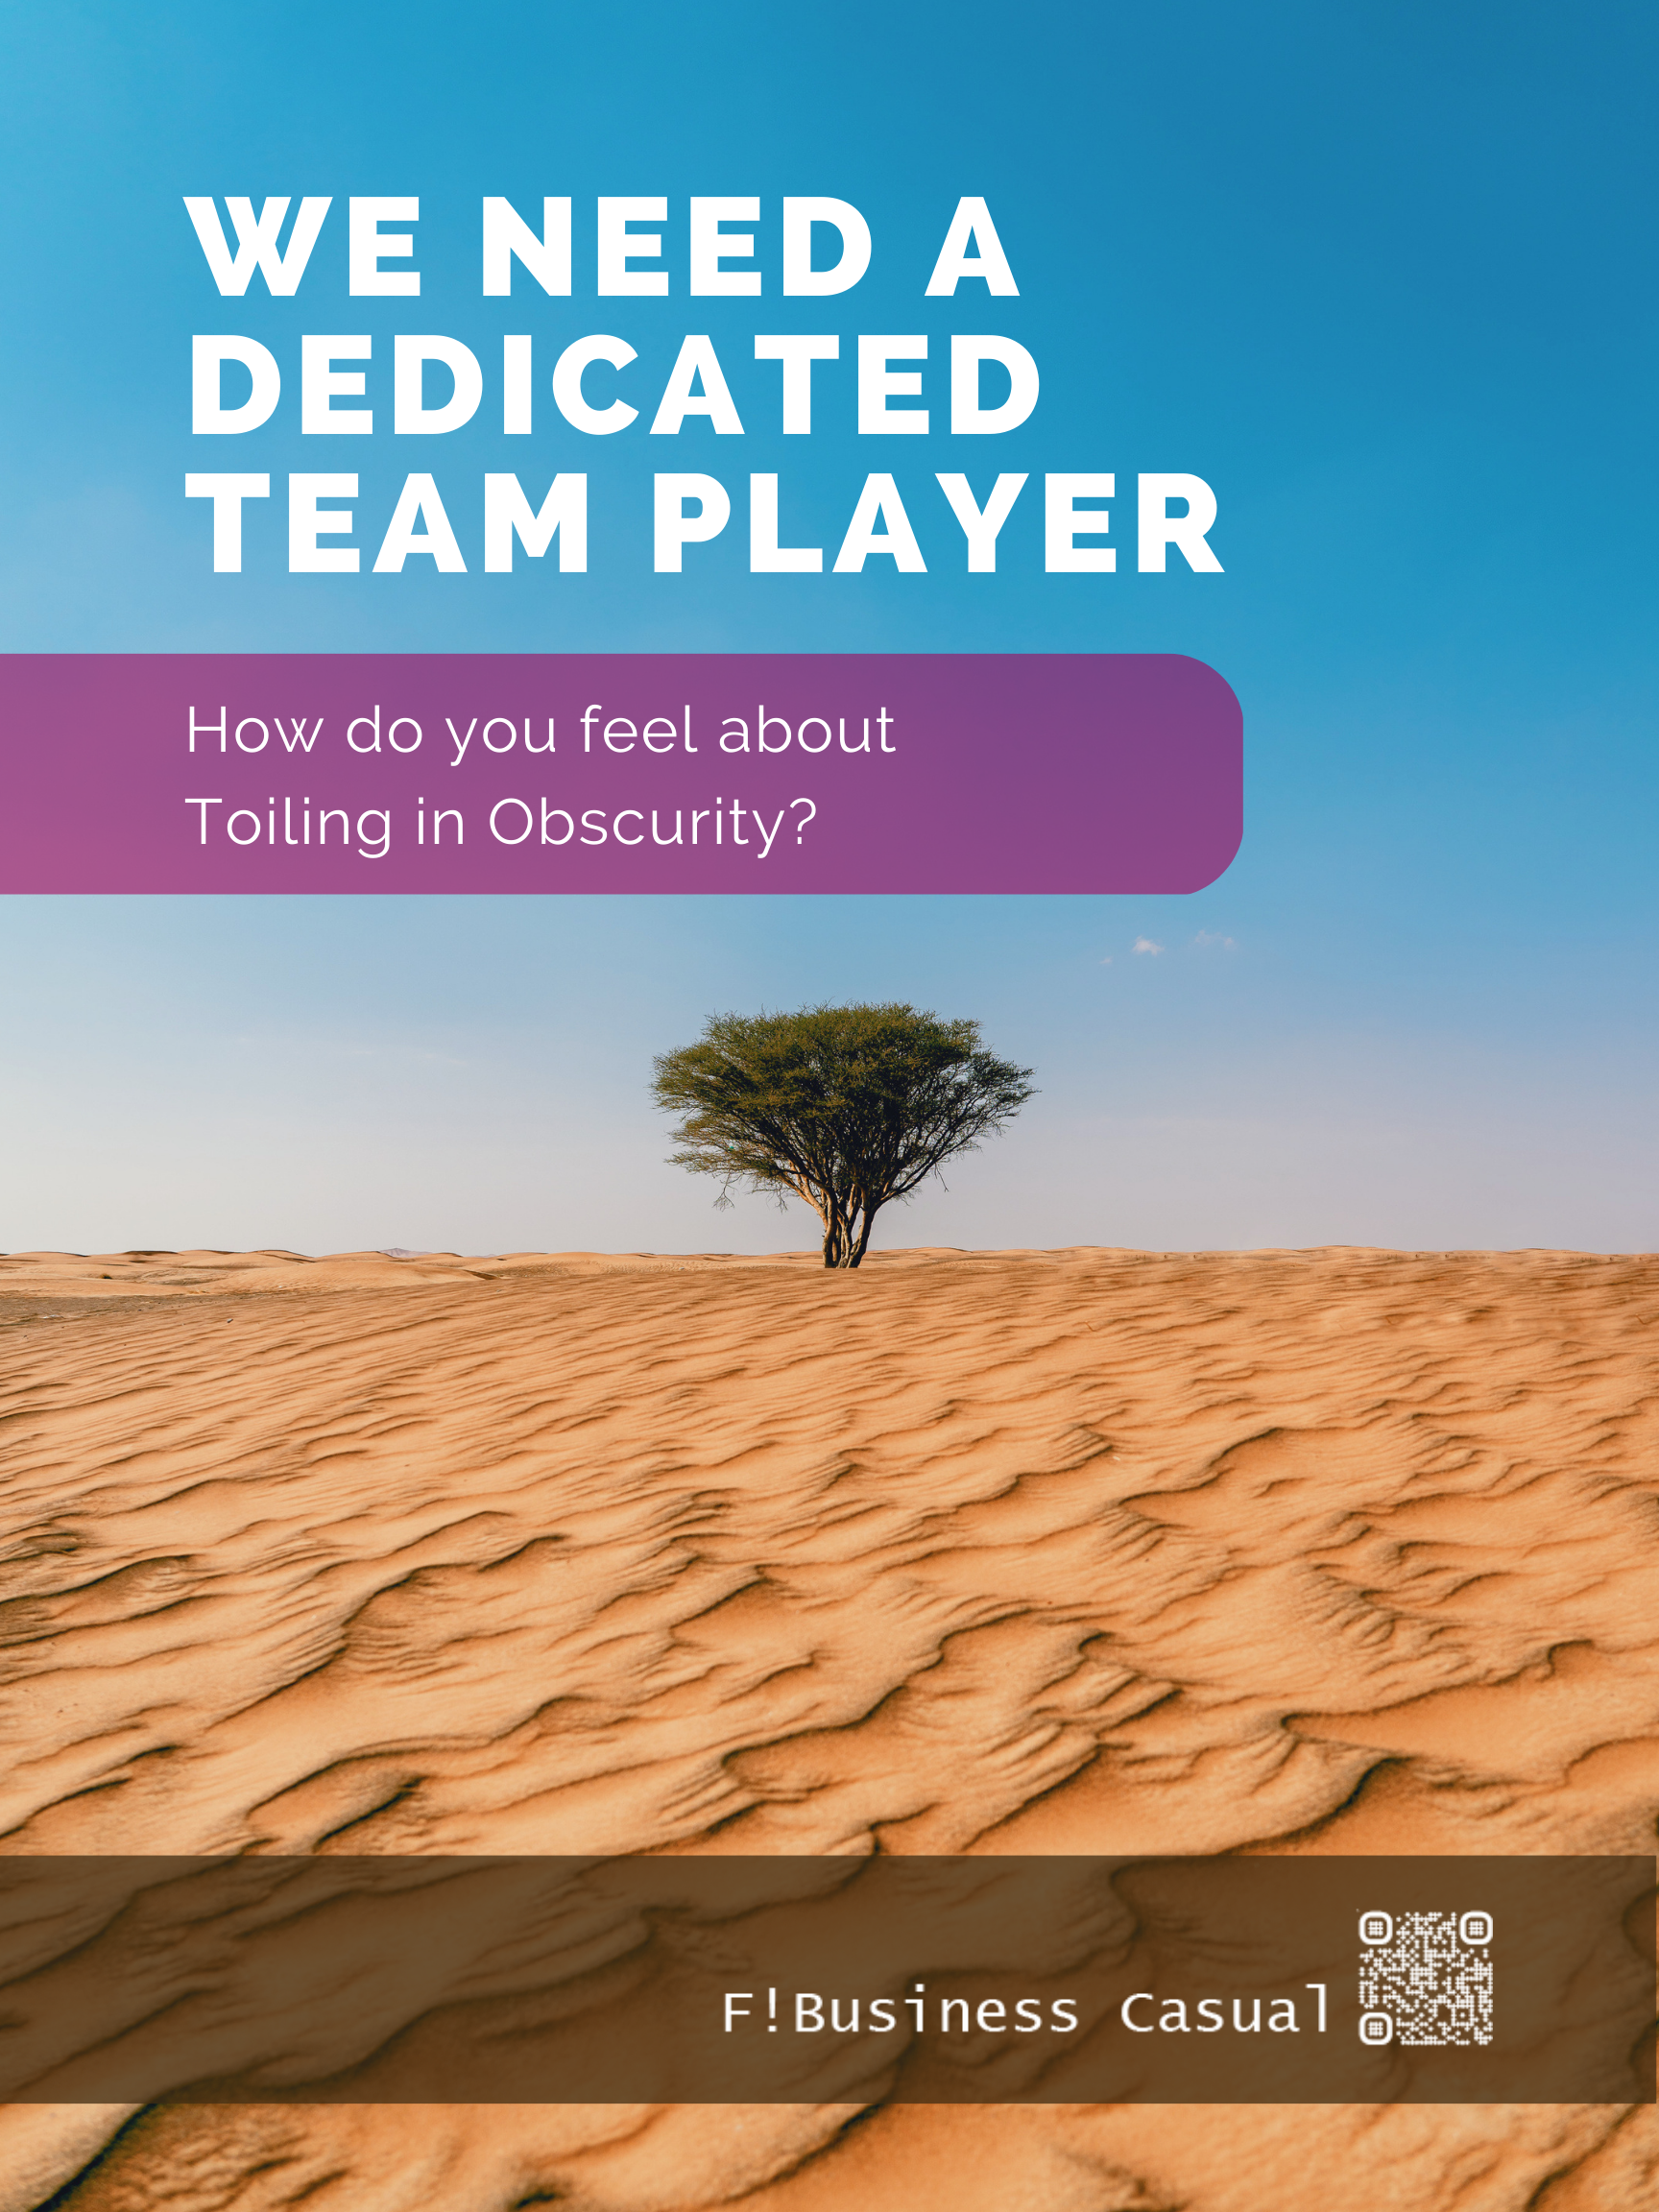 We need a dedicated team player. How do you feel about toiling in obscurity?